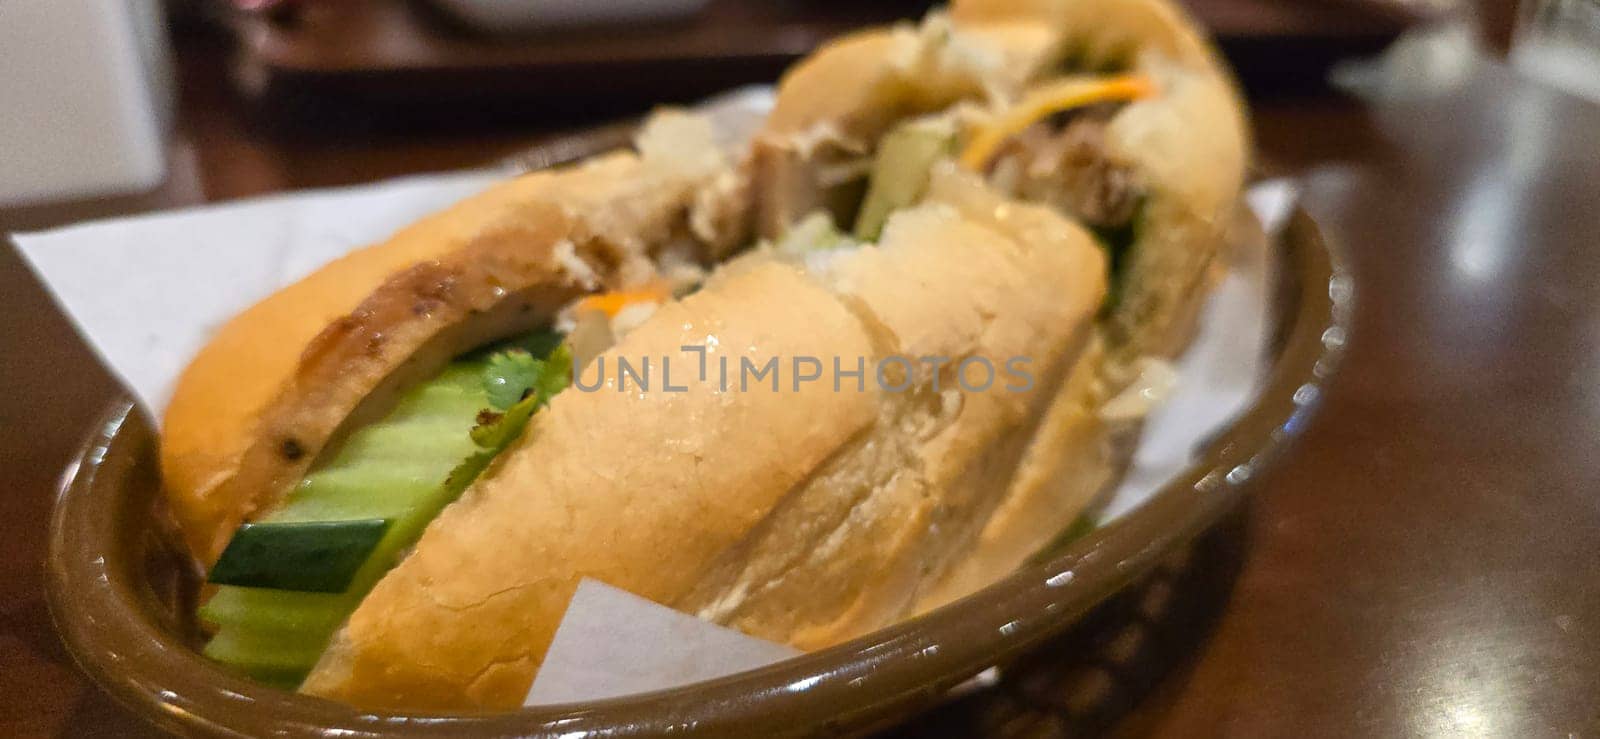 Sandwich Banh mi, vietnamese baguette with grilled chicken and mixed salad, vietnamese sandwich in local asian restaurant